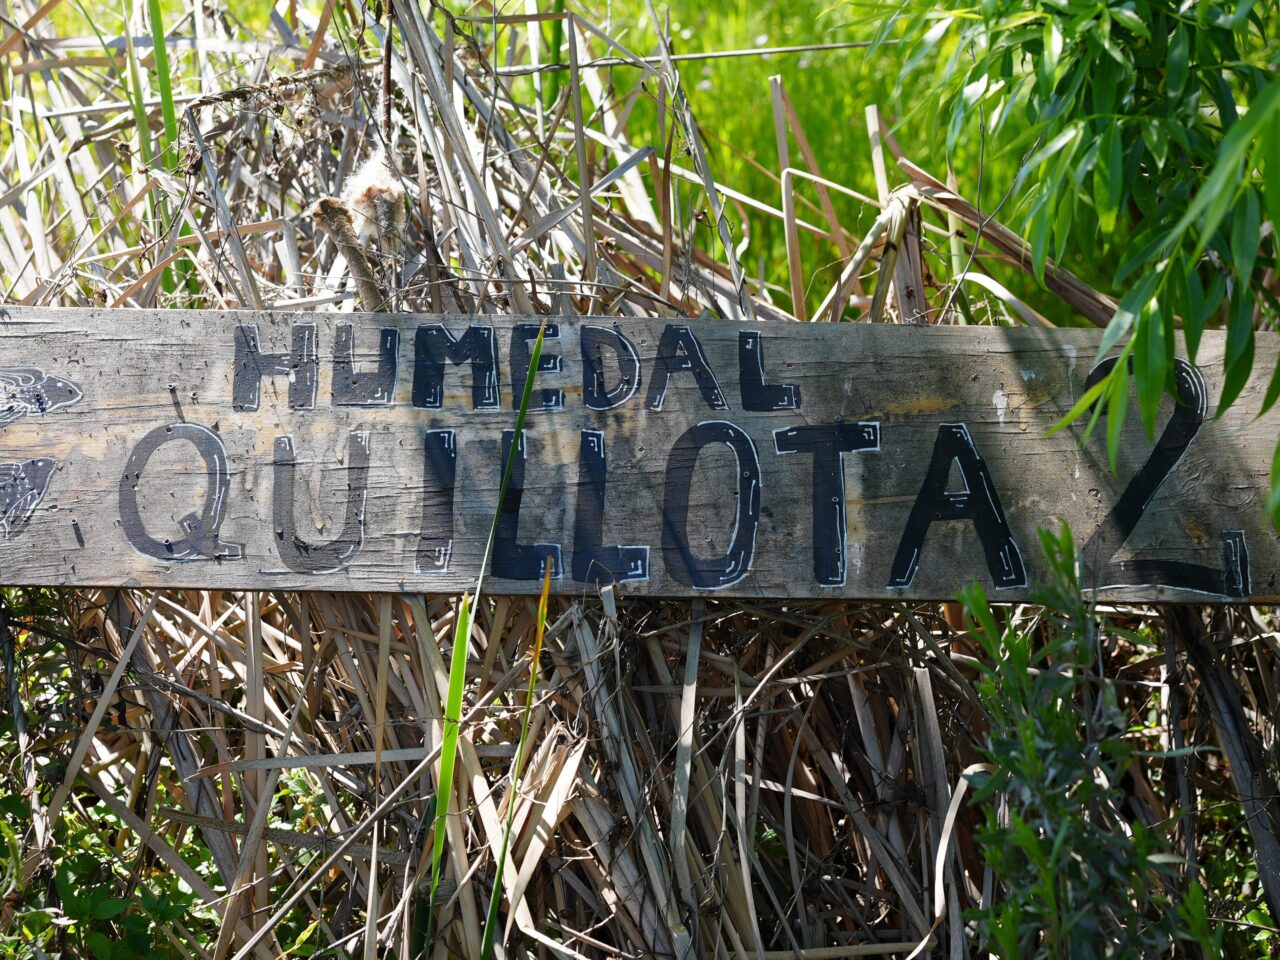 A sign that reads "Humedal Quillota"